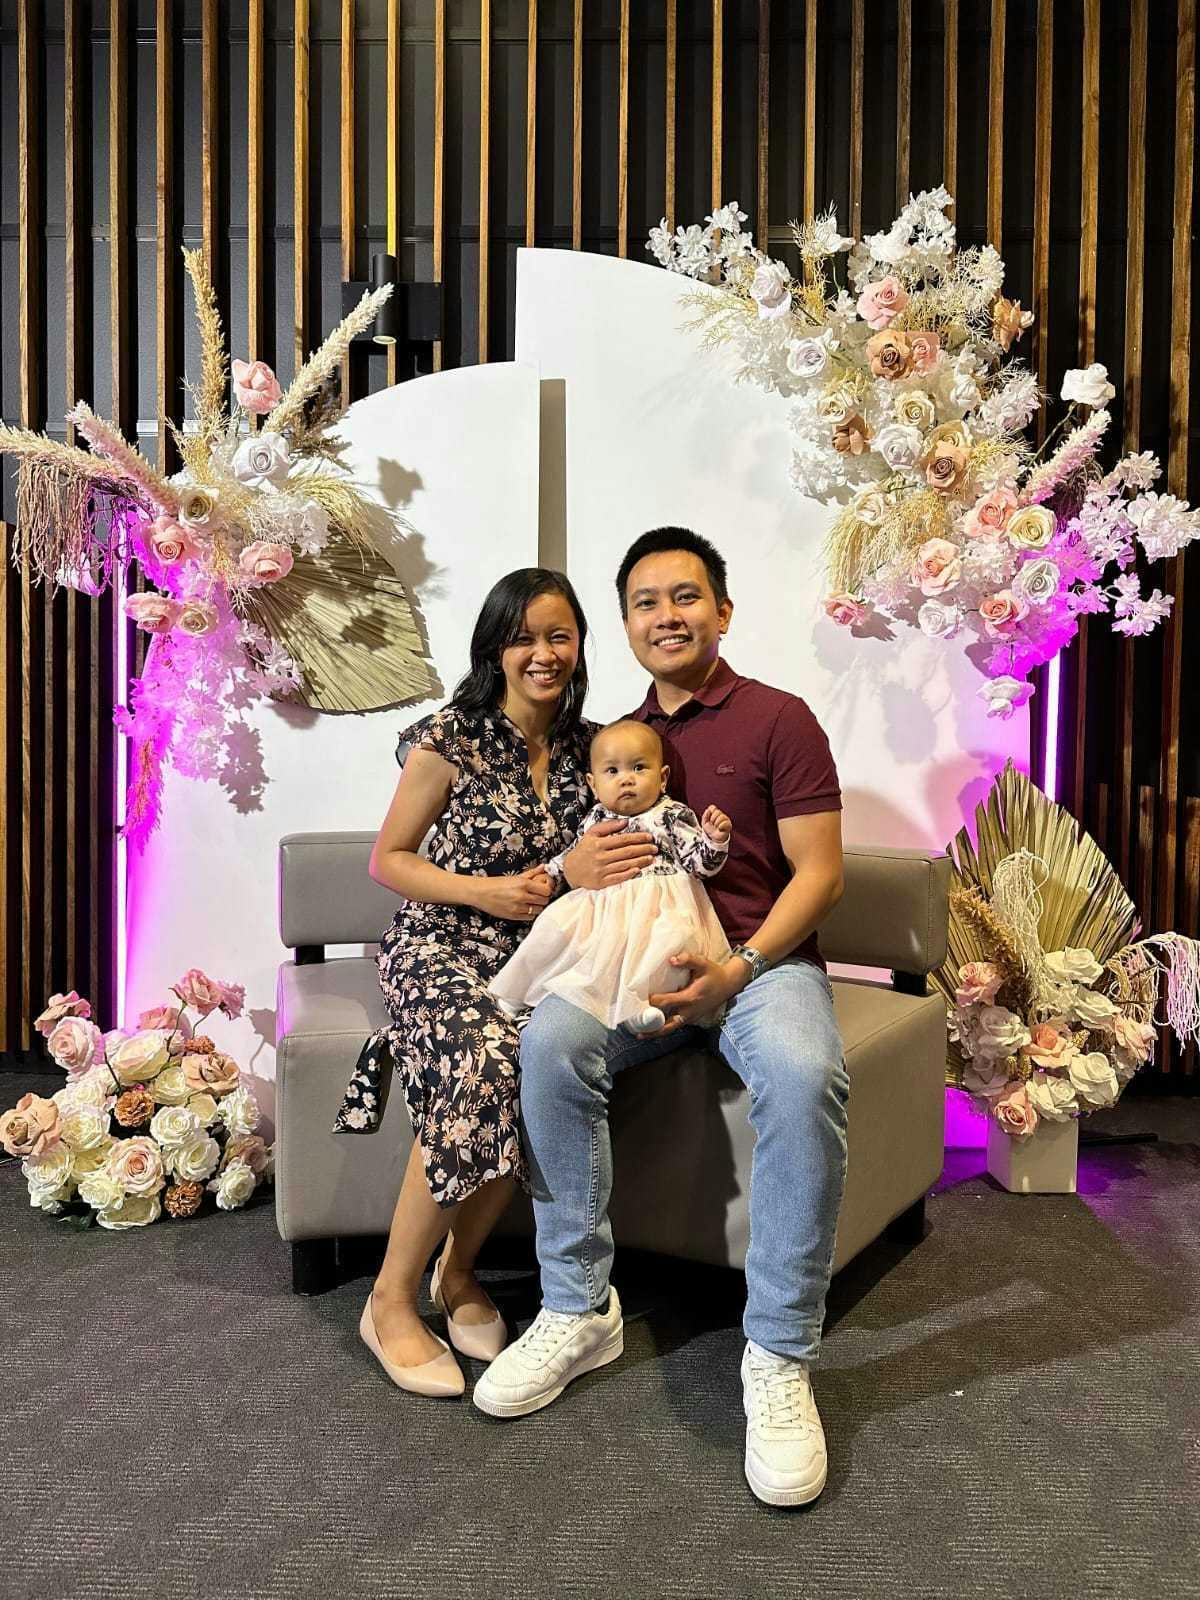 Daniel and his family in front of a floral backdrop